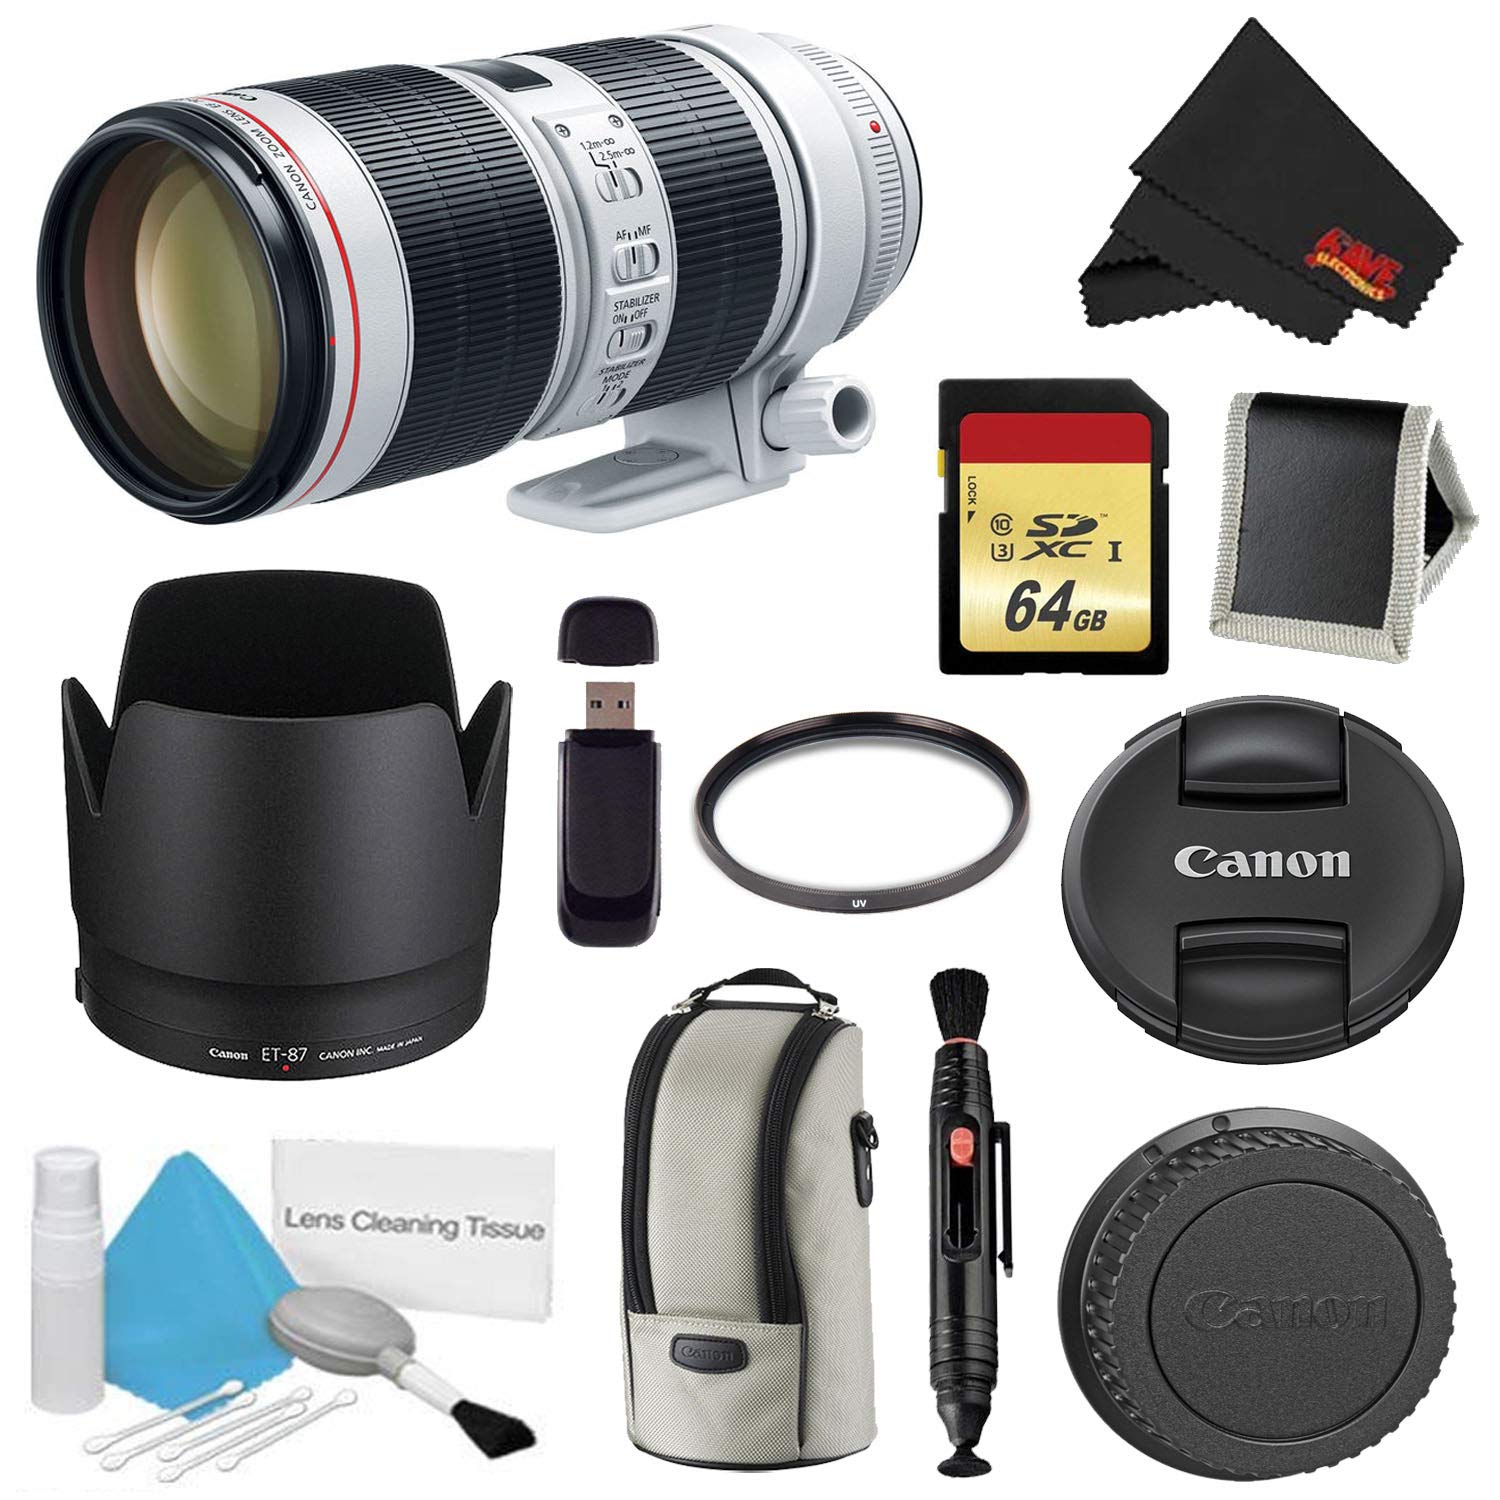 Canon EF 70-200mm f/2.8L is III USM Lens Bundle w/ 64GB Memory Card + Accessories, and UV Filter (International Model)